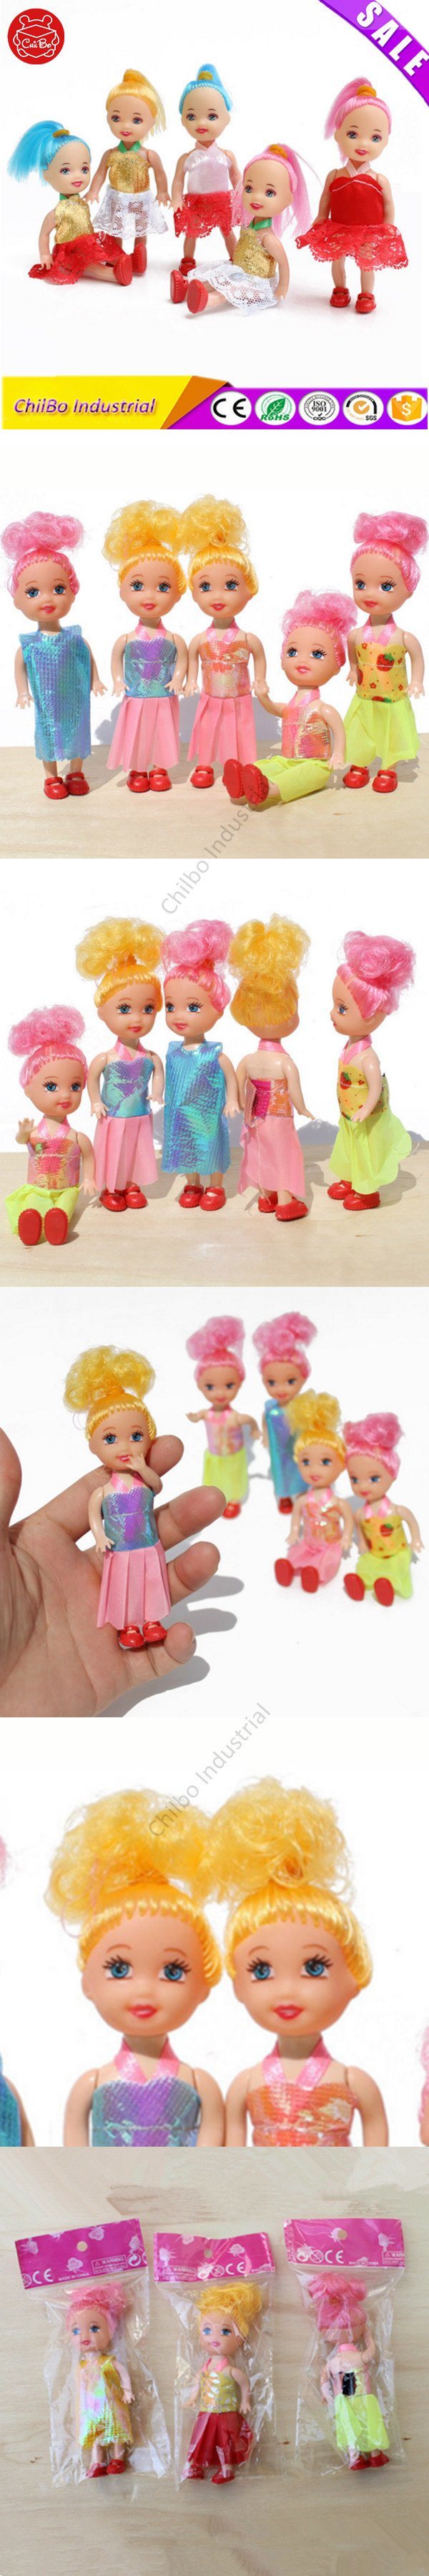 2 Inch Plastic Baby Dolls Small Cute Toys